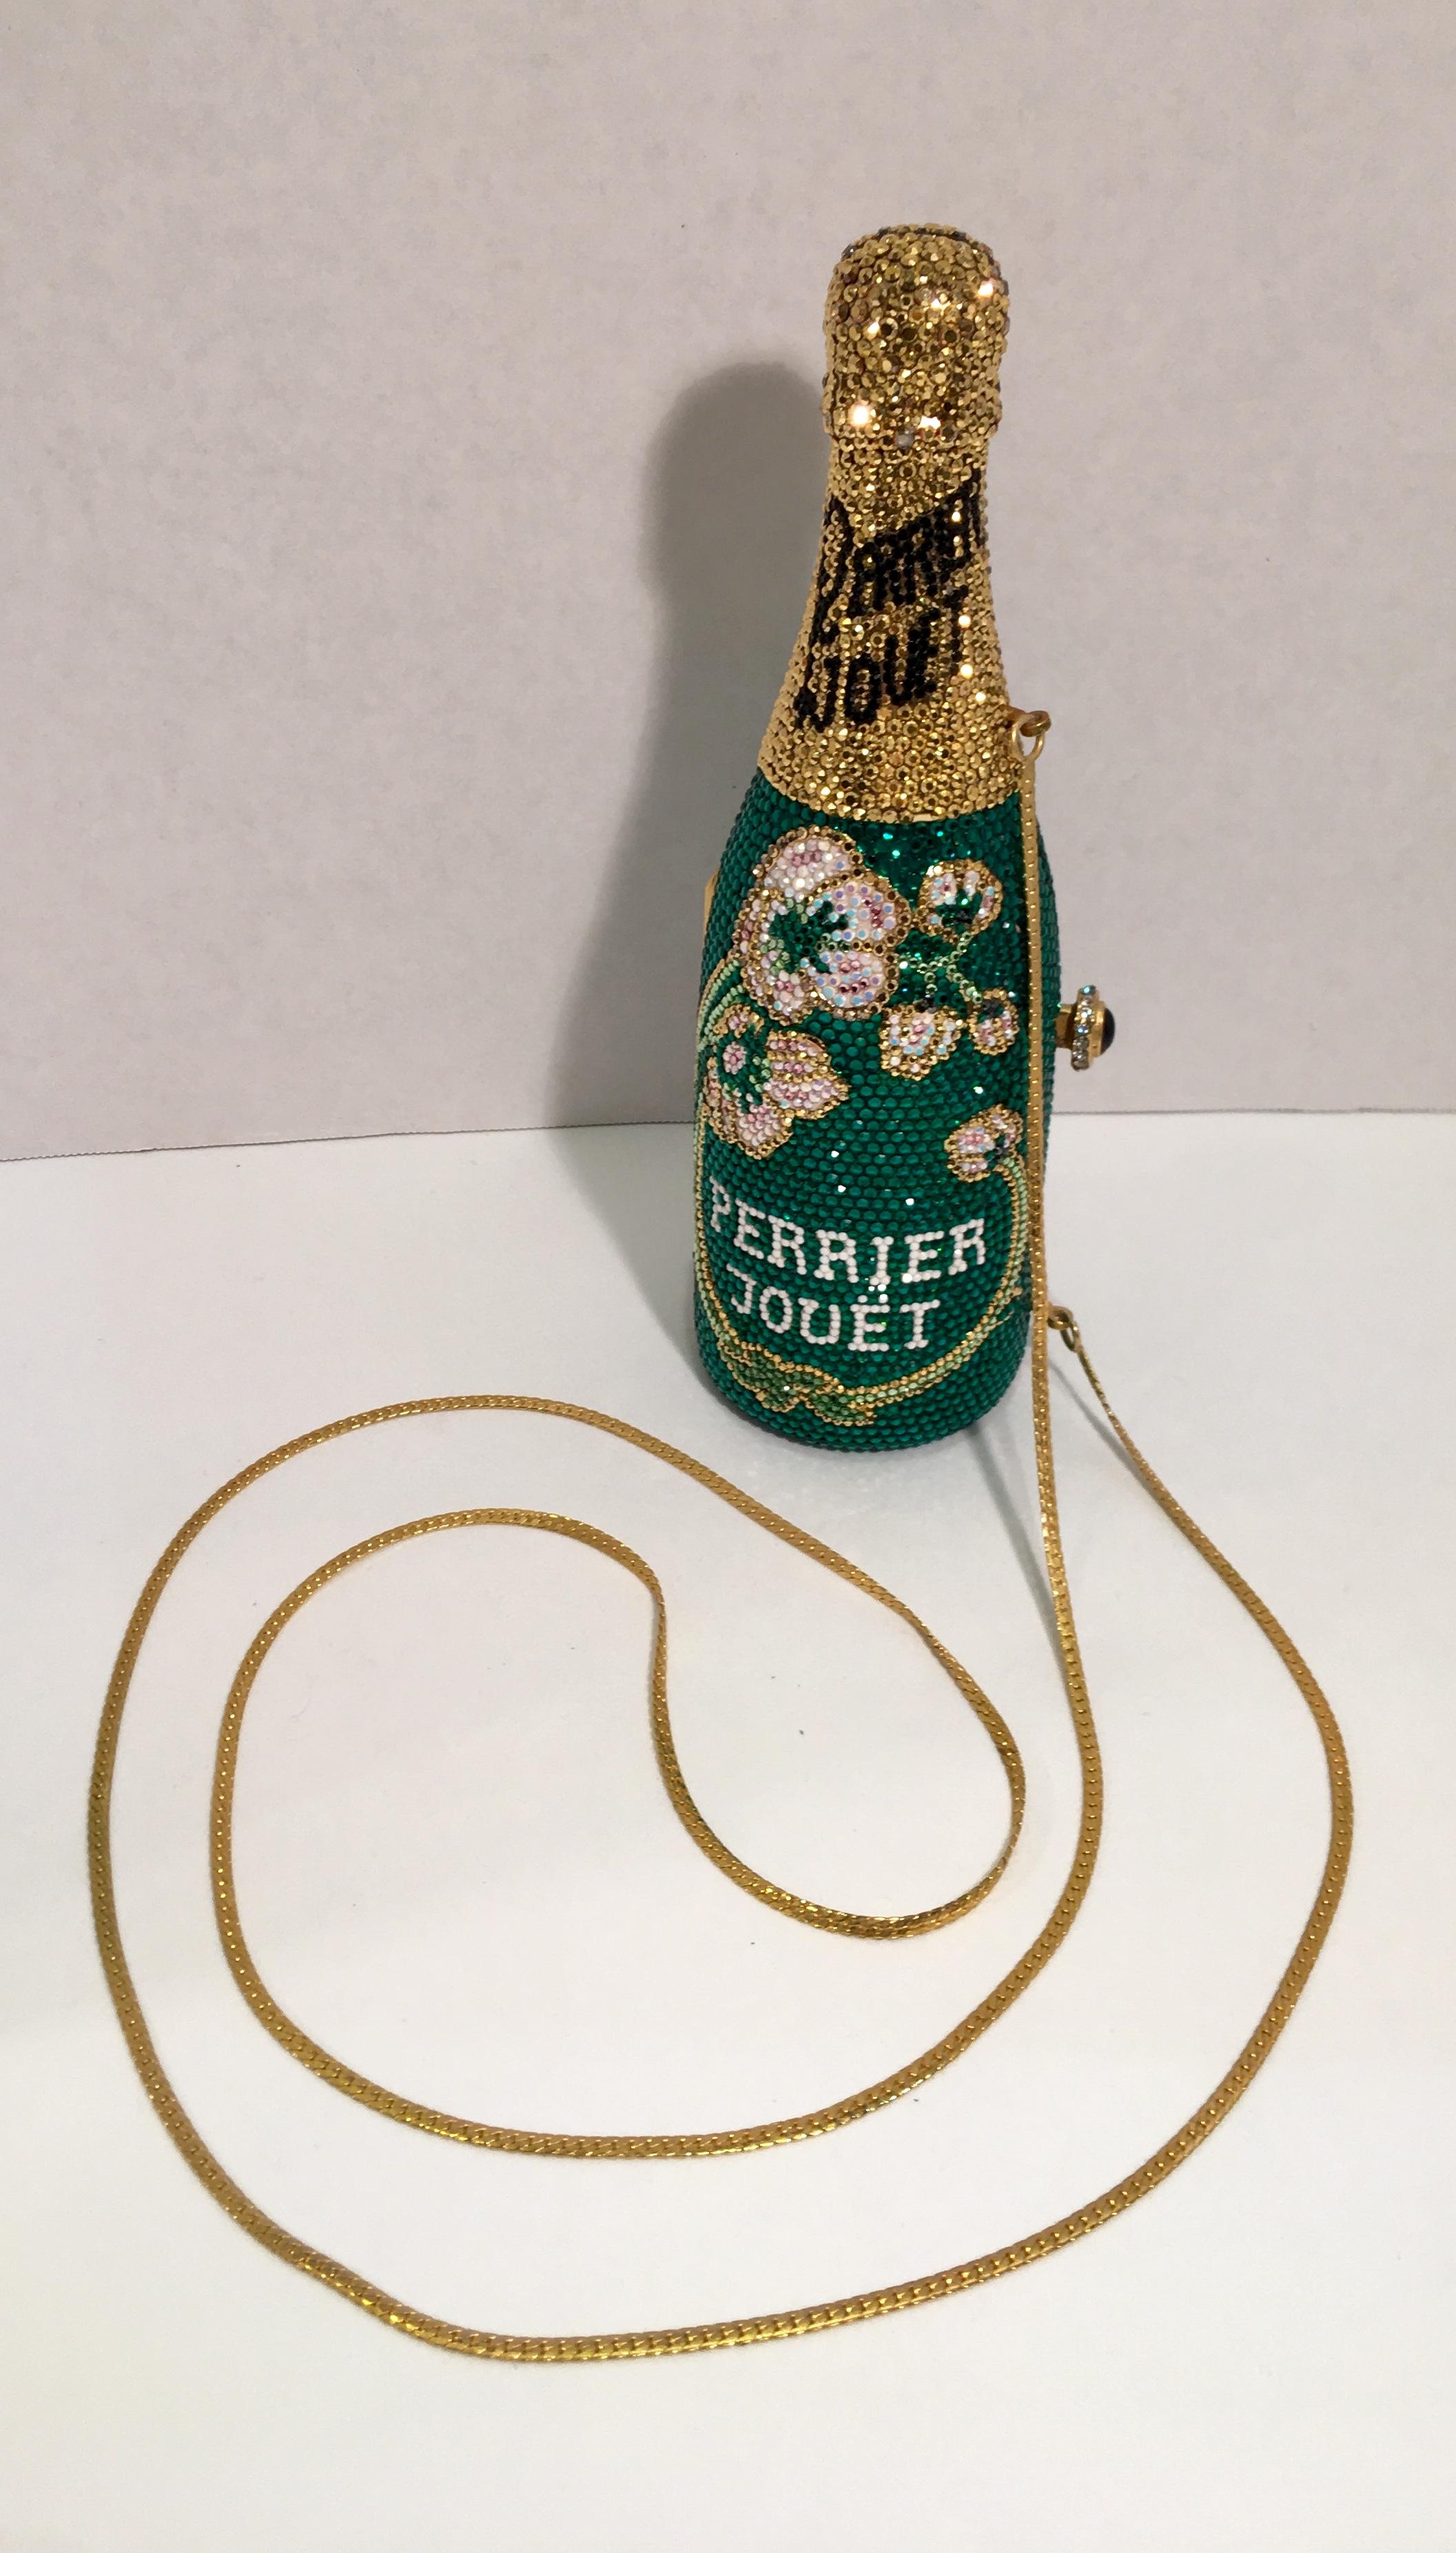 Kathrine Baumann Limited Edition Perrier Jouet Bottle Miniaudiere Evening Bag In Good Condition In Tustin, CA